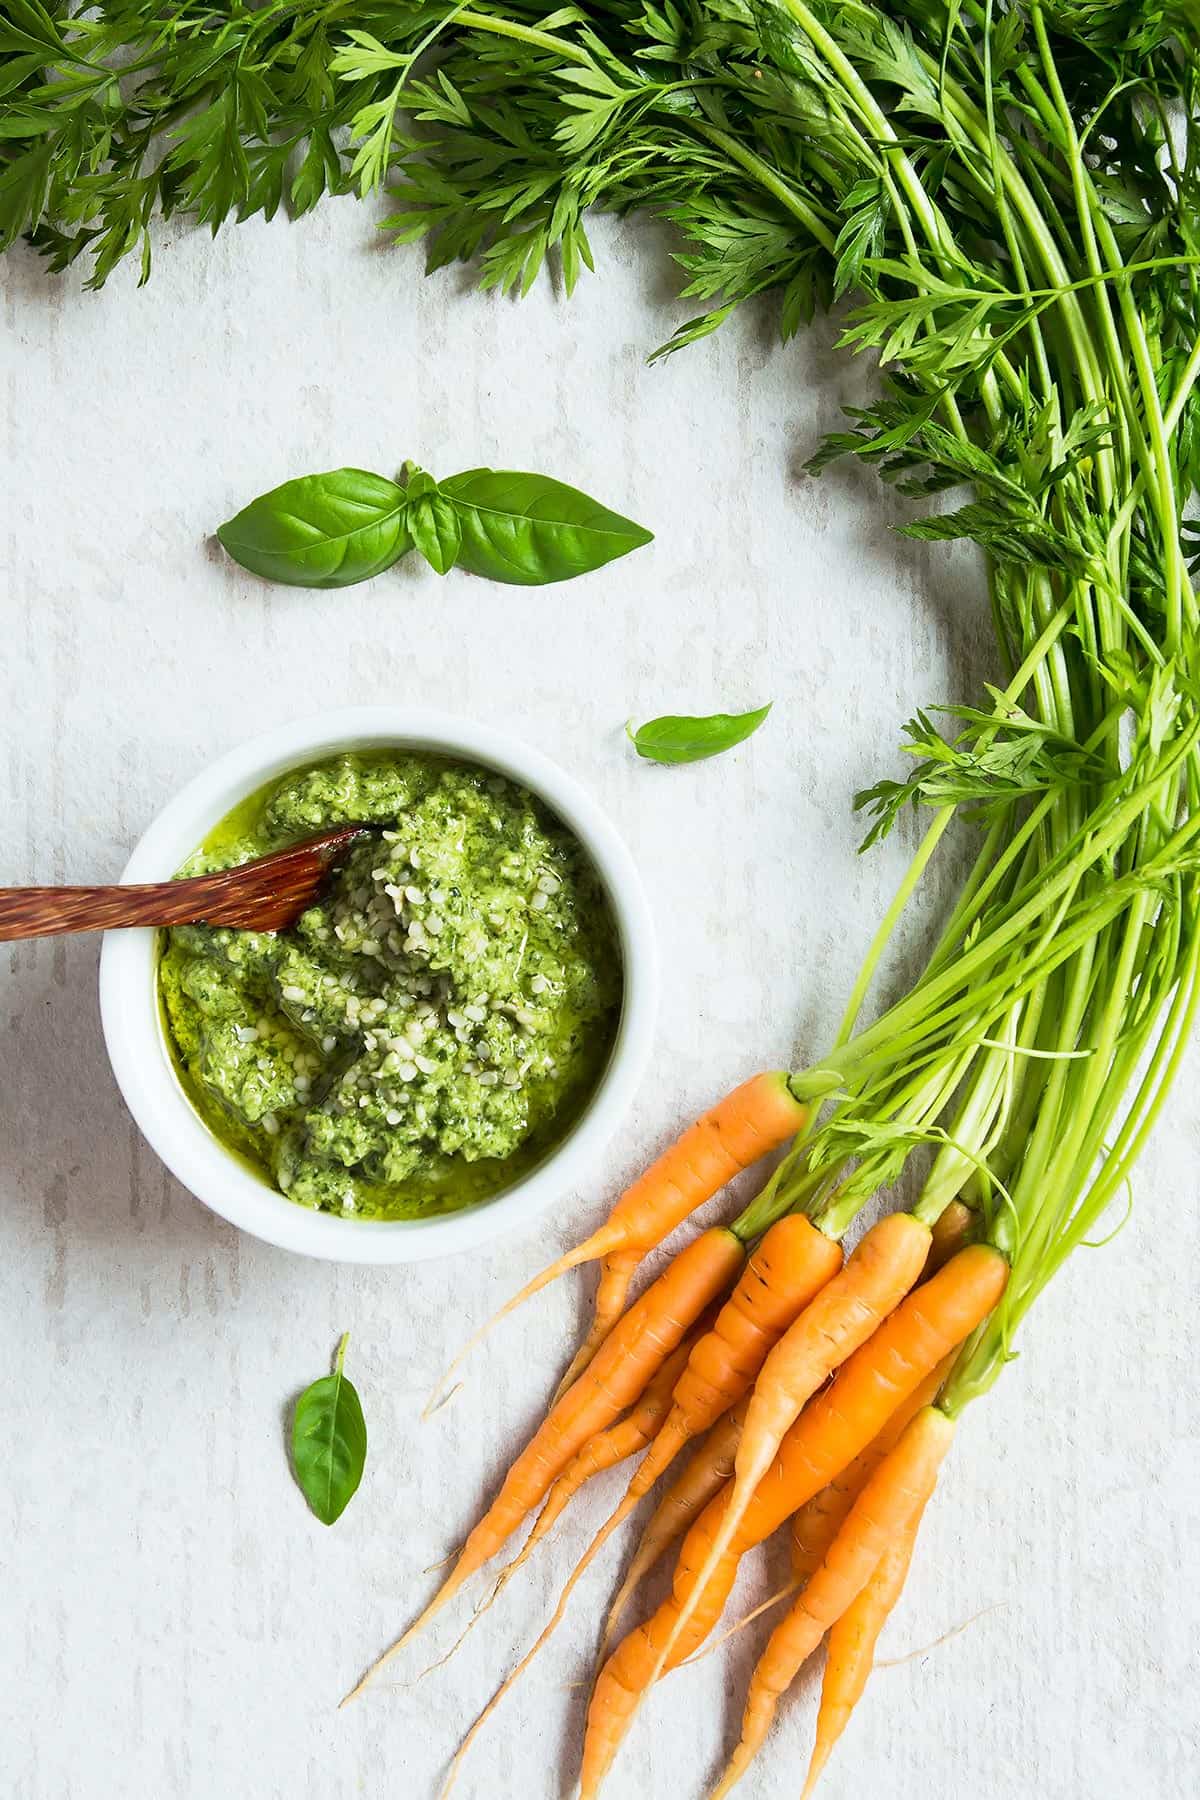 Carrot Top Pesto and Carrots